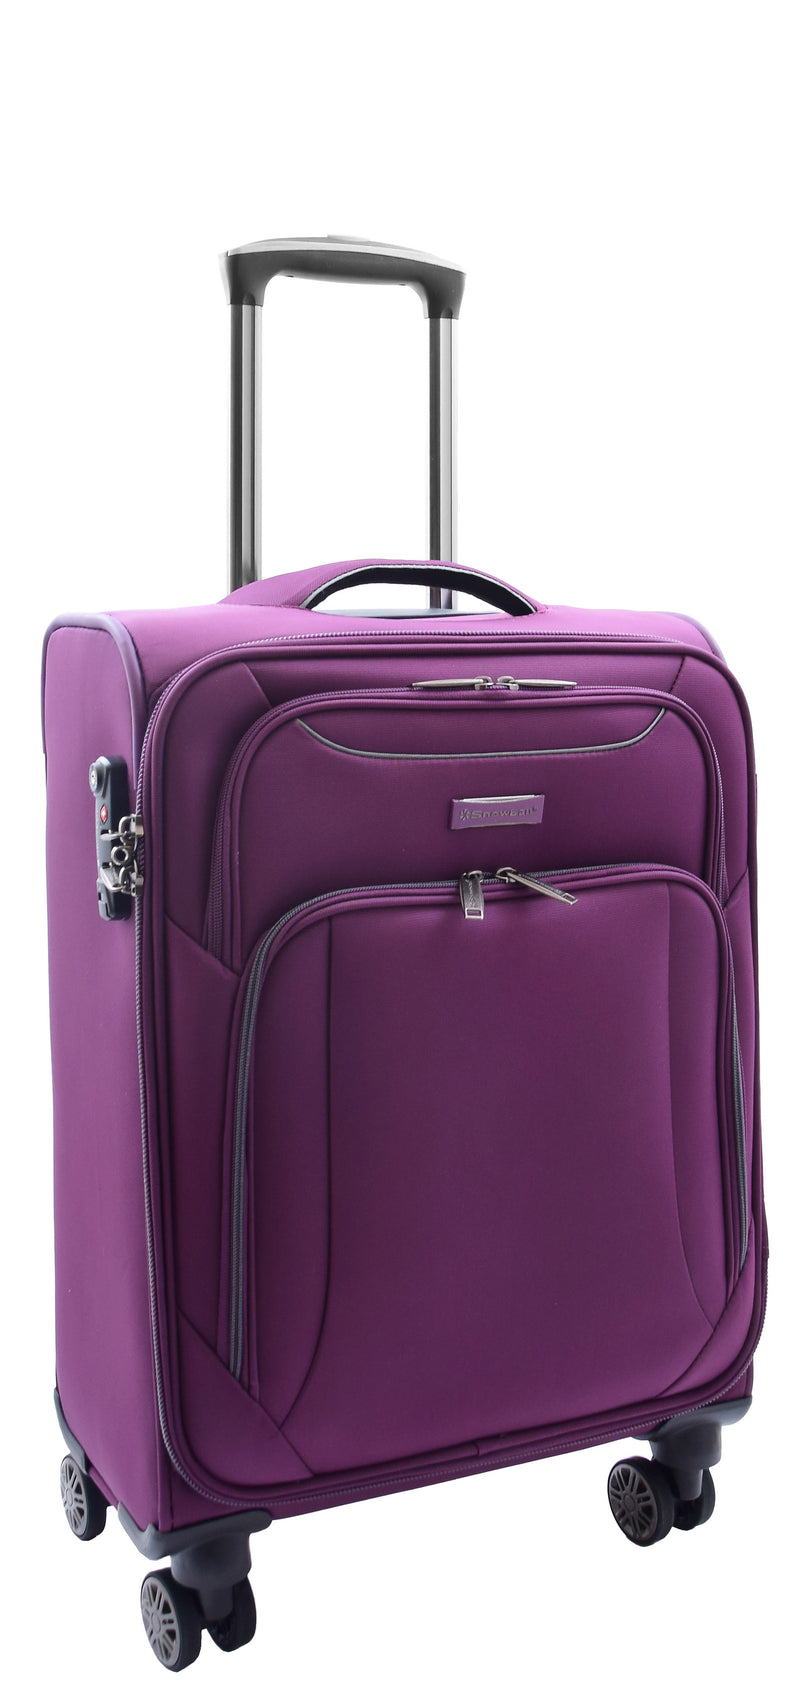 Cabin Size Suitcase 4 Wheel Luggage Lightweight | House of Leather